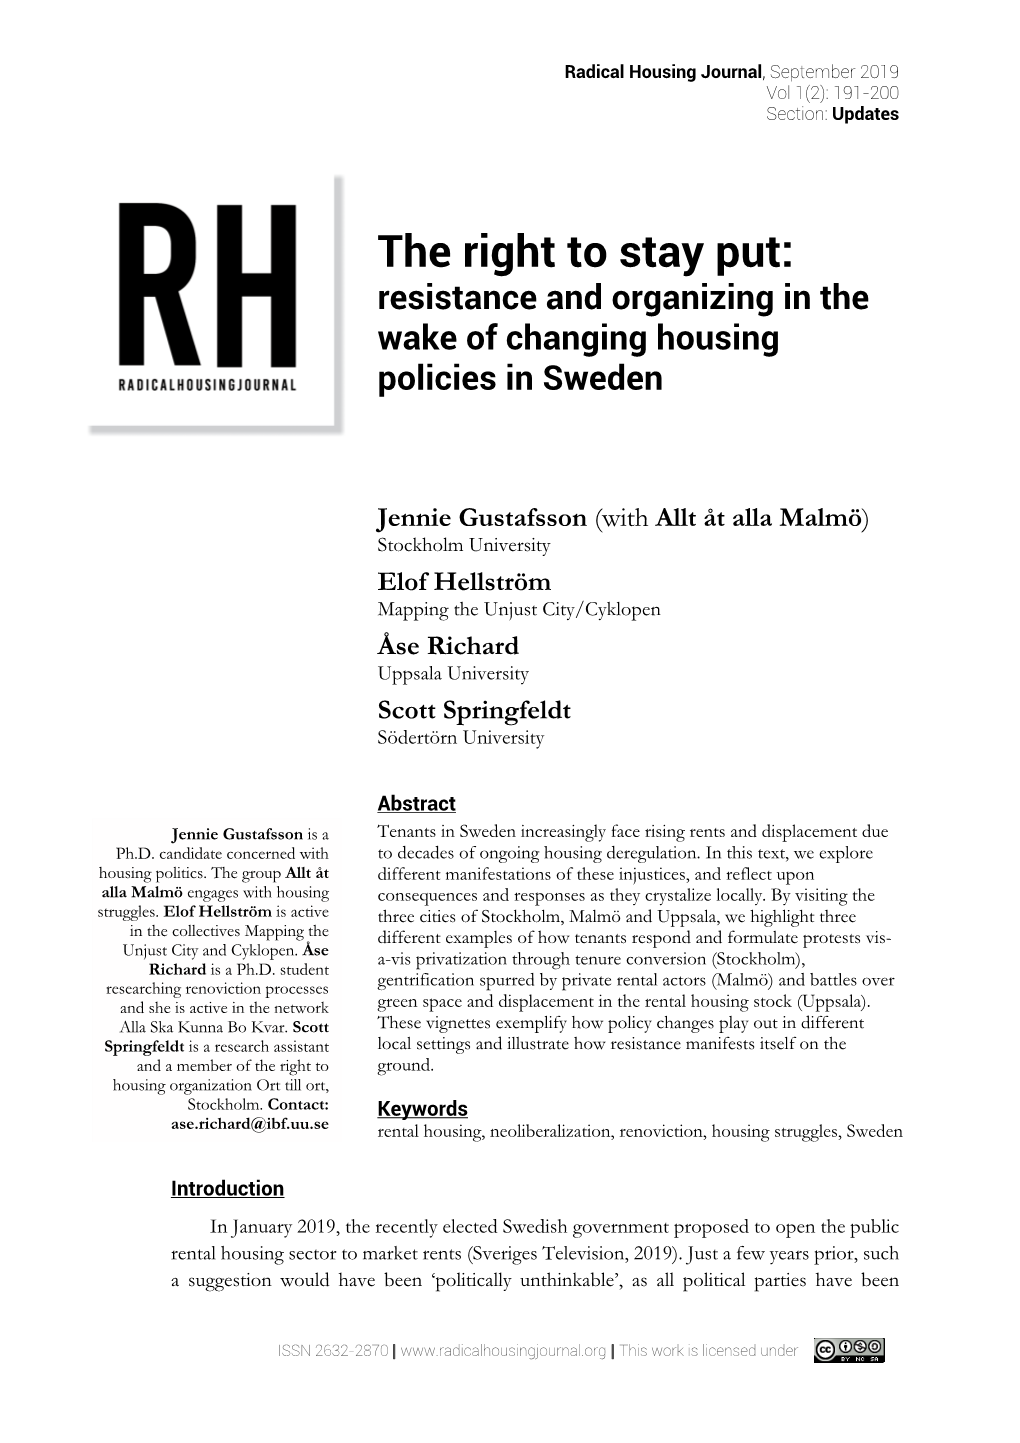 The Right to Stay Put: Resistance and Organizing in the Wake of Changing Housing Policies in Sweden